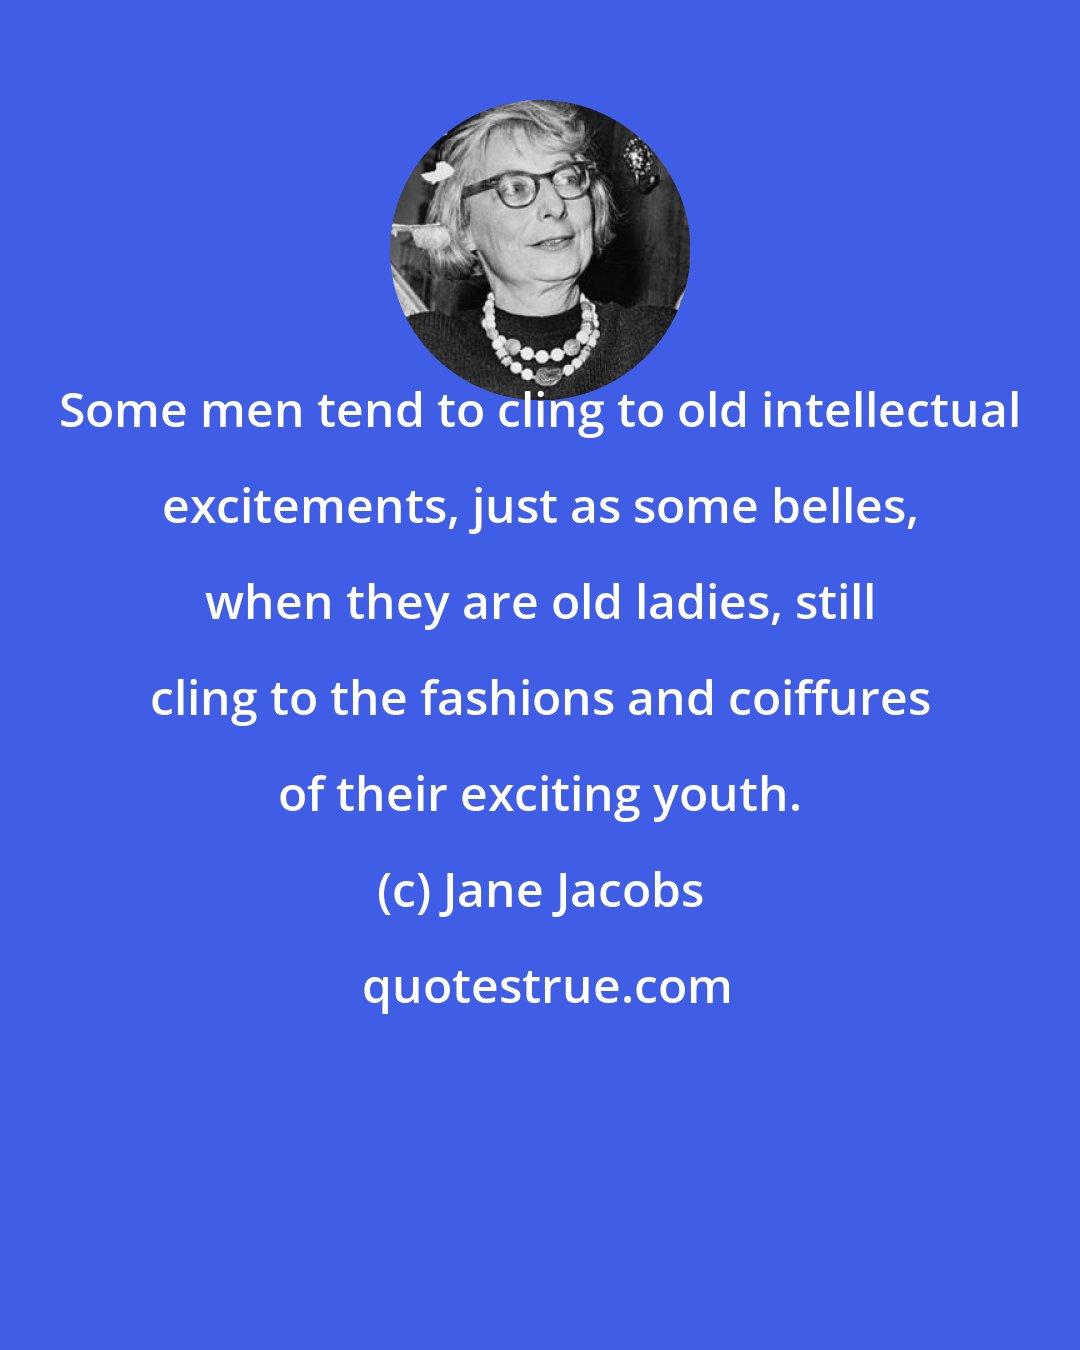 Jane Jacobs: Some men tend to cling to old intellectual excitements, just as some belles, when they are old ladies, still cling to the fashions and coiffures of their exciting youth.